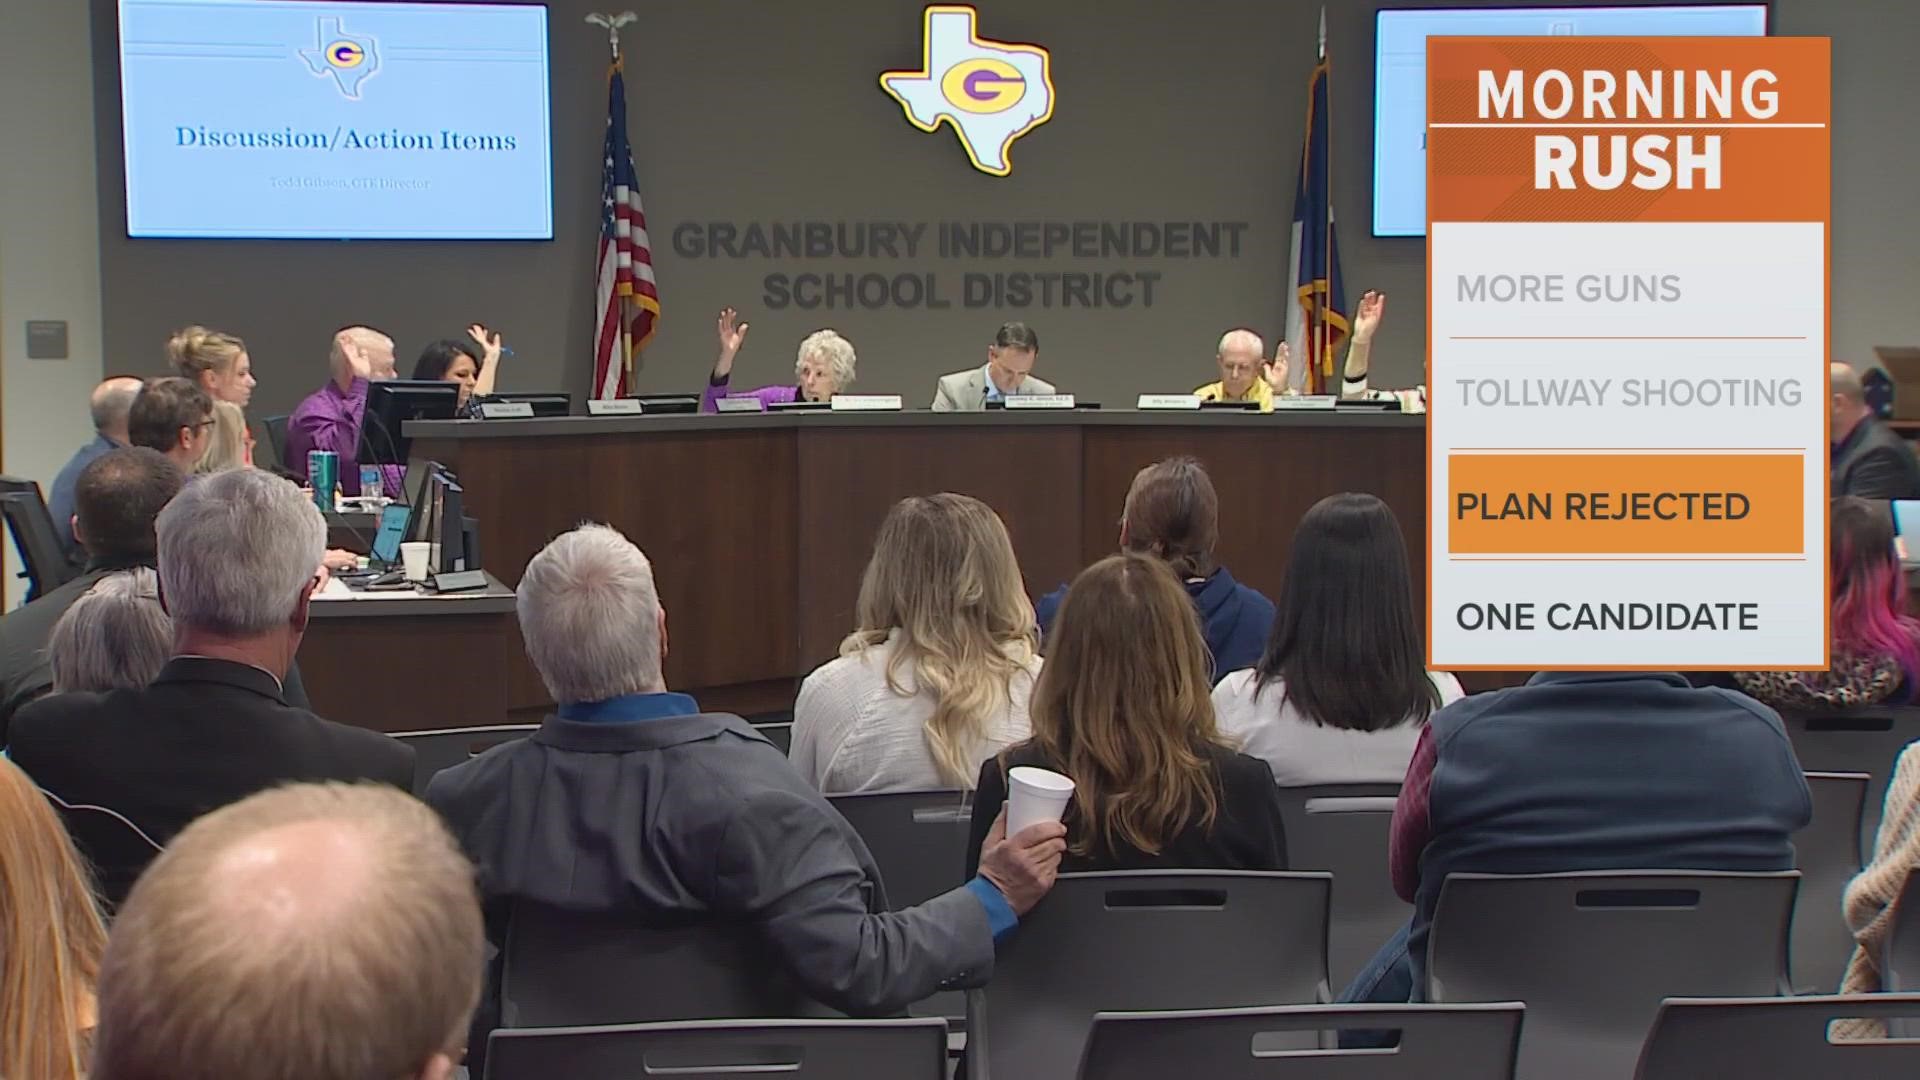 Granbury ISD rejects plan to require staff to report criminal act